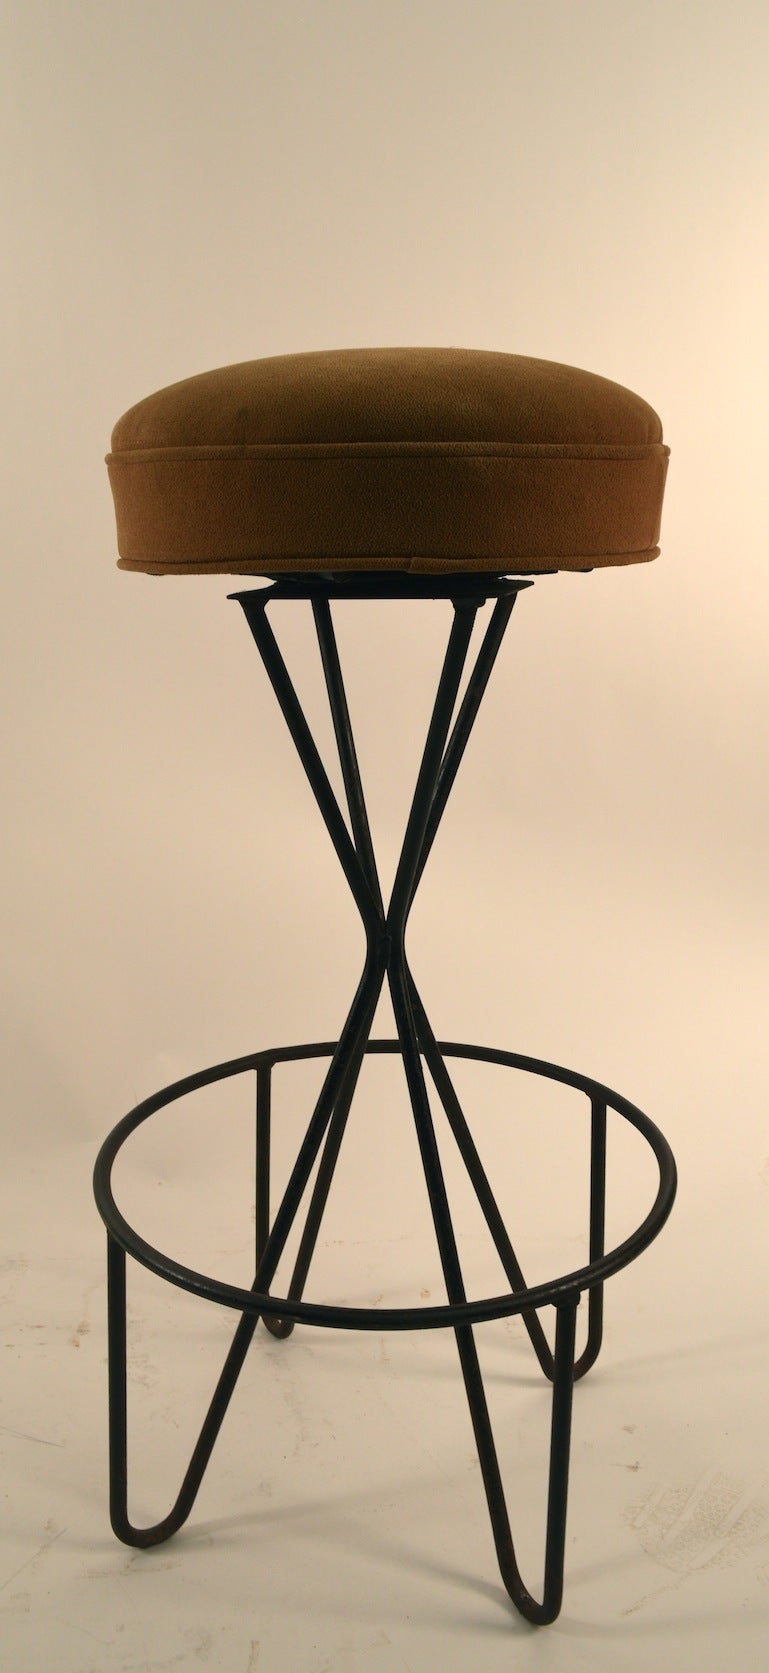 Four matching swivel stools designed by Paul Tuttle, wrought iron bases, with upholstered pad seat.